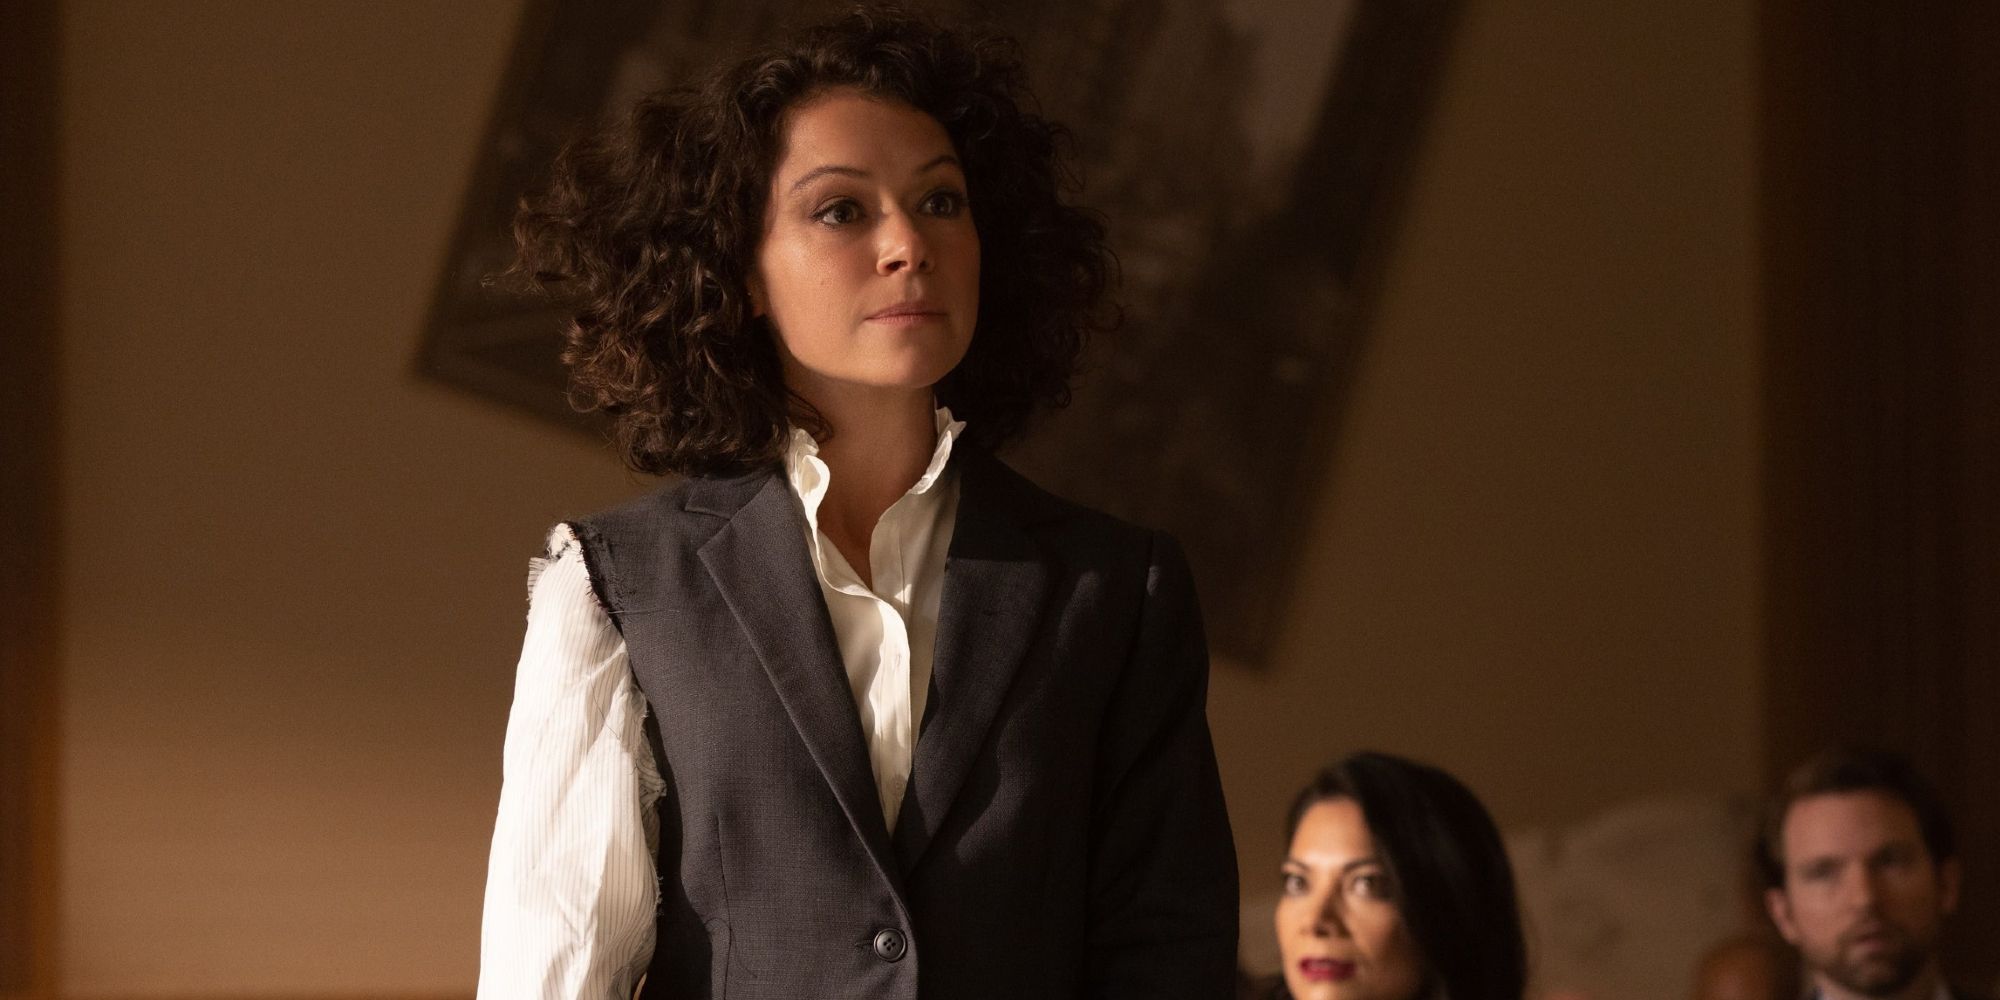 Tatiana Maslany as Jennifer Walters in court with a ripped sleeve in "She-Hulk: Attorney at Law"